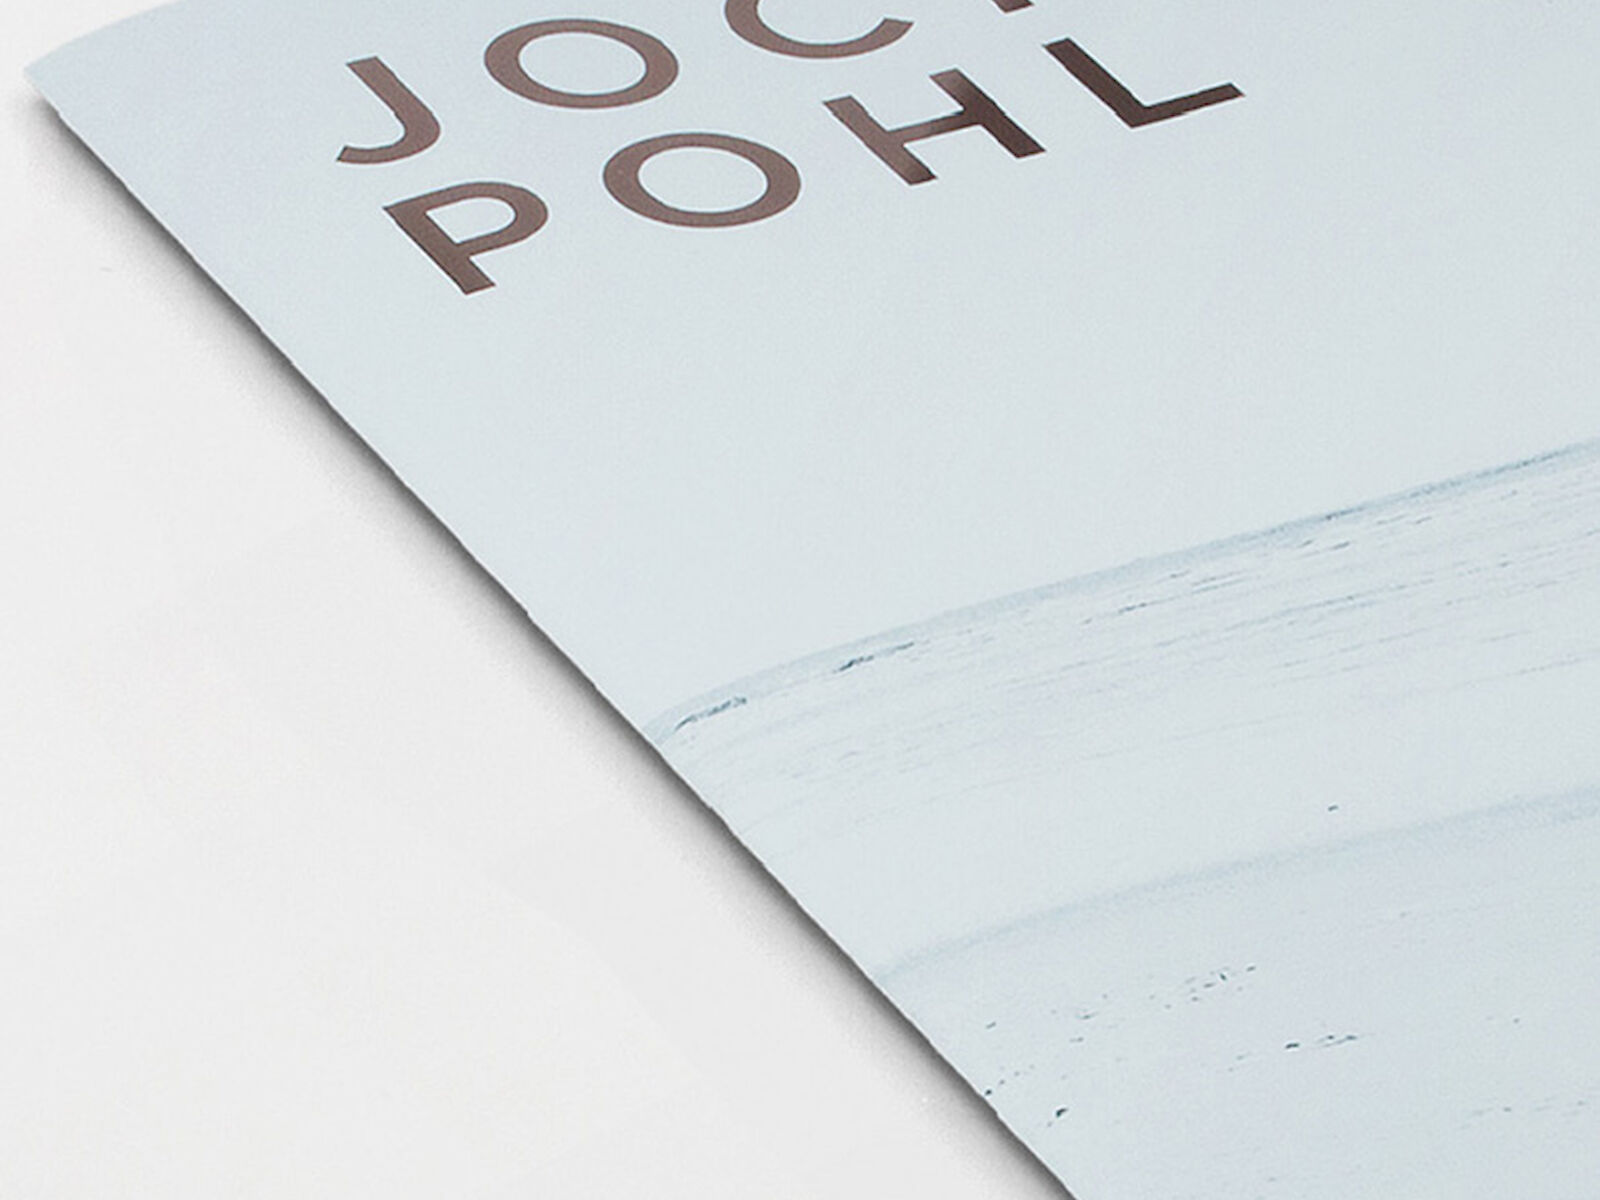 Catalogue design on occasion of the Baselworld fair for Jochen Pohl